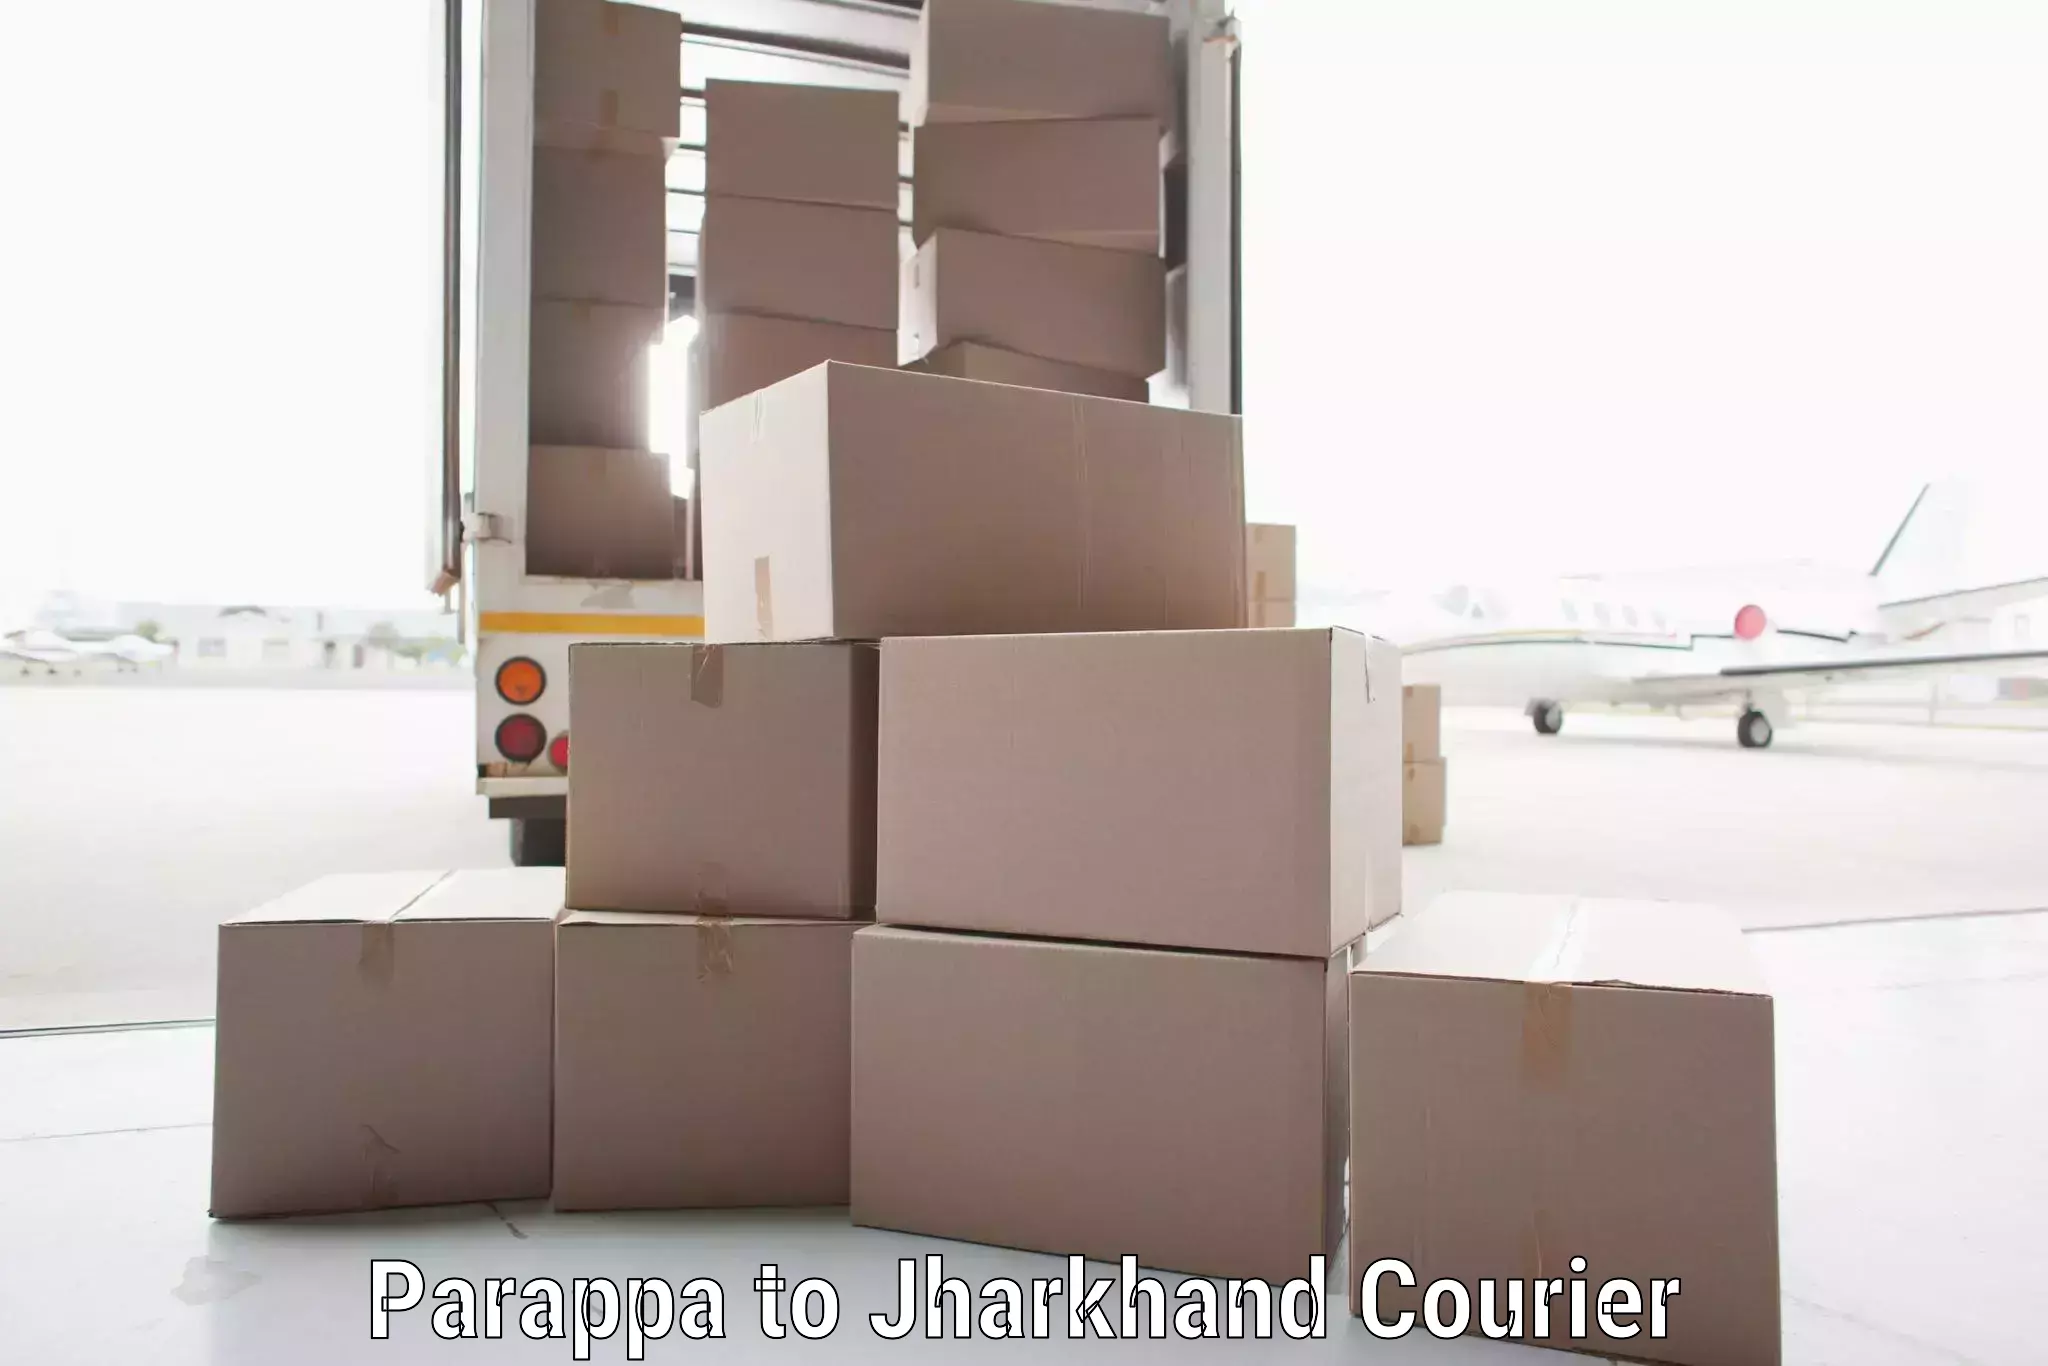 Online shipping calculator Parappa to Jharkhand